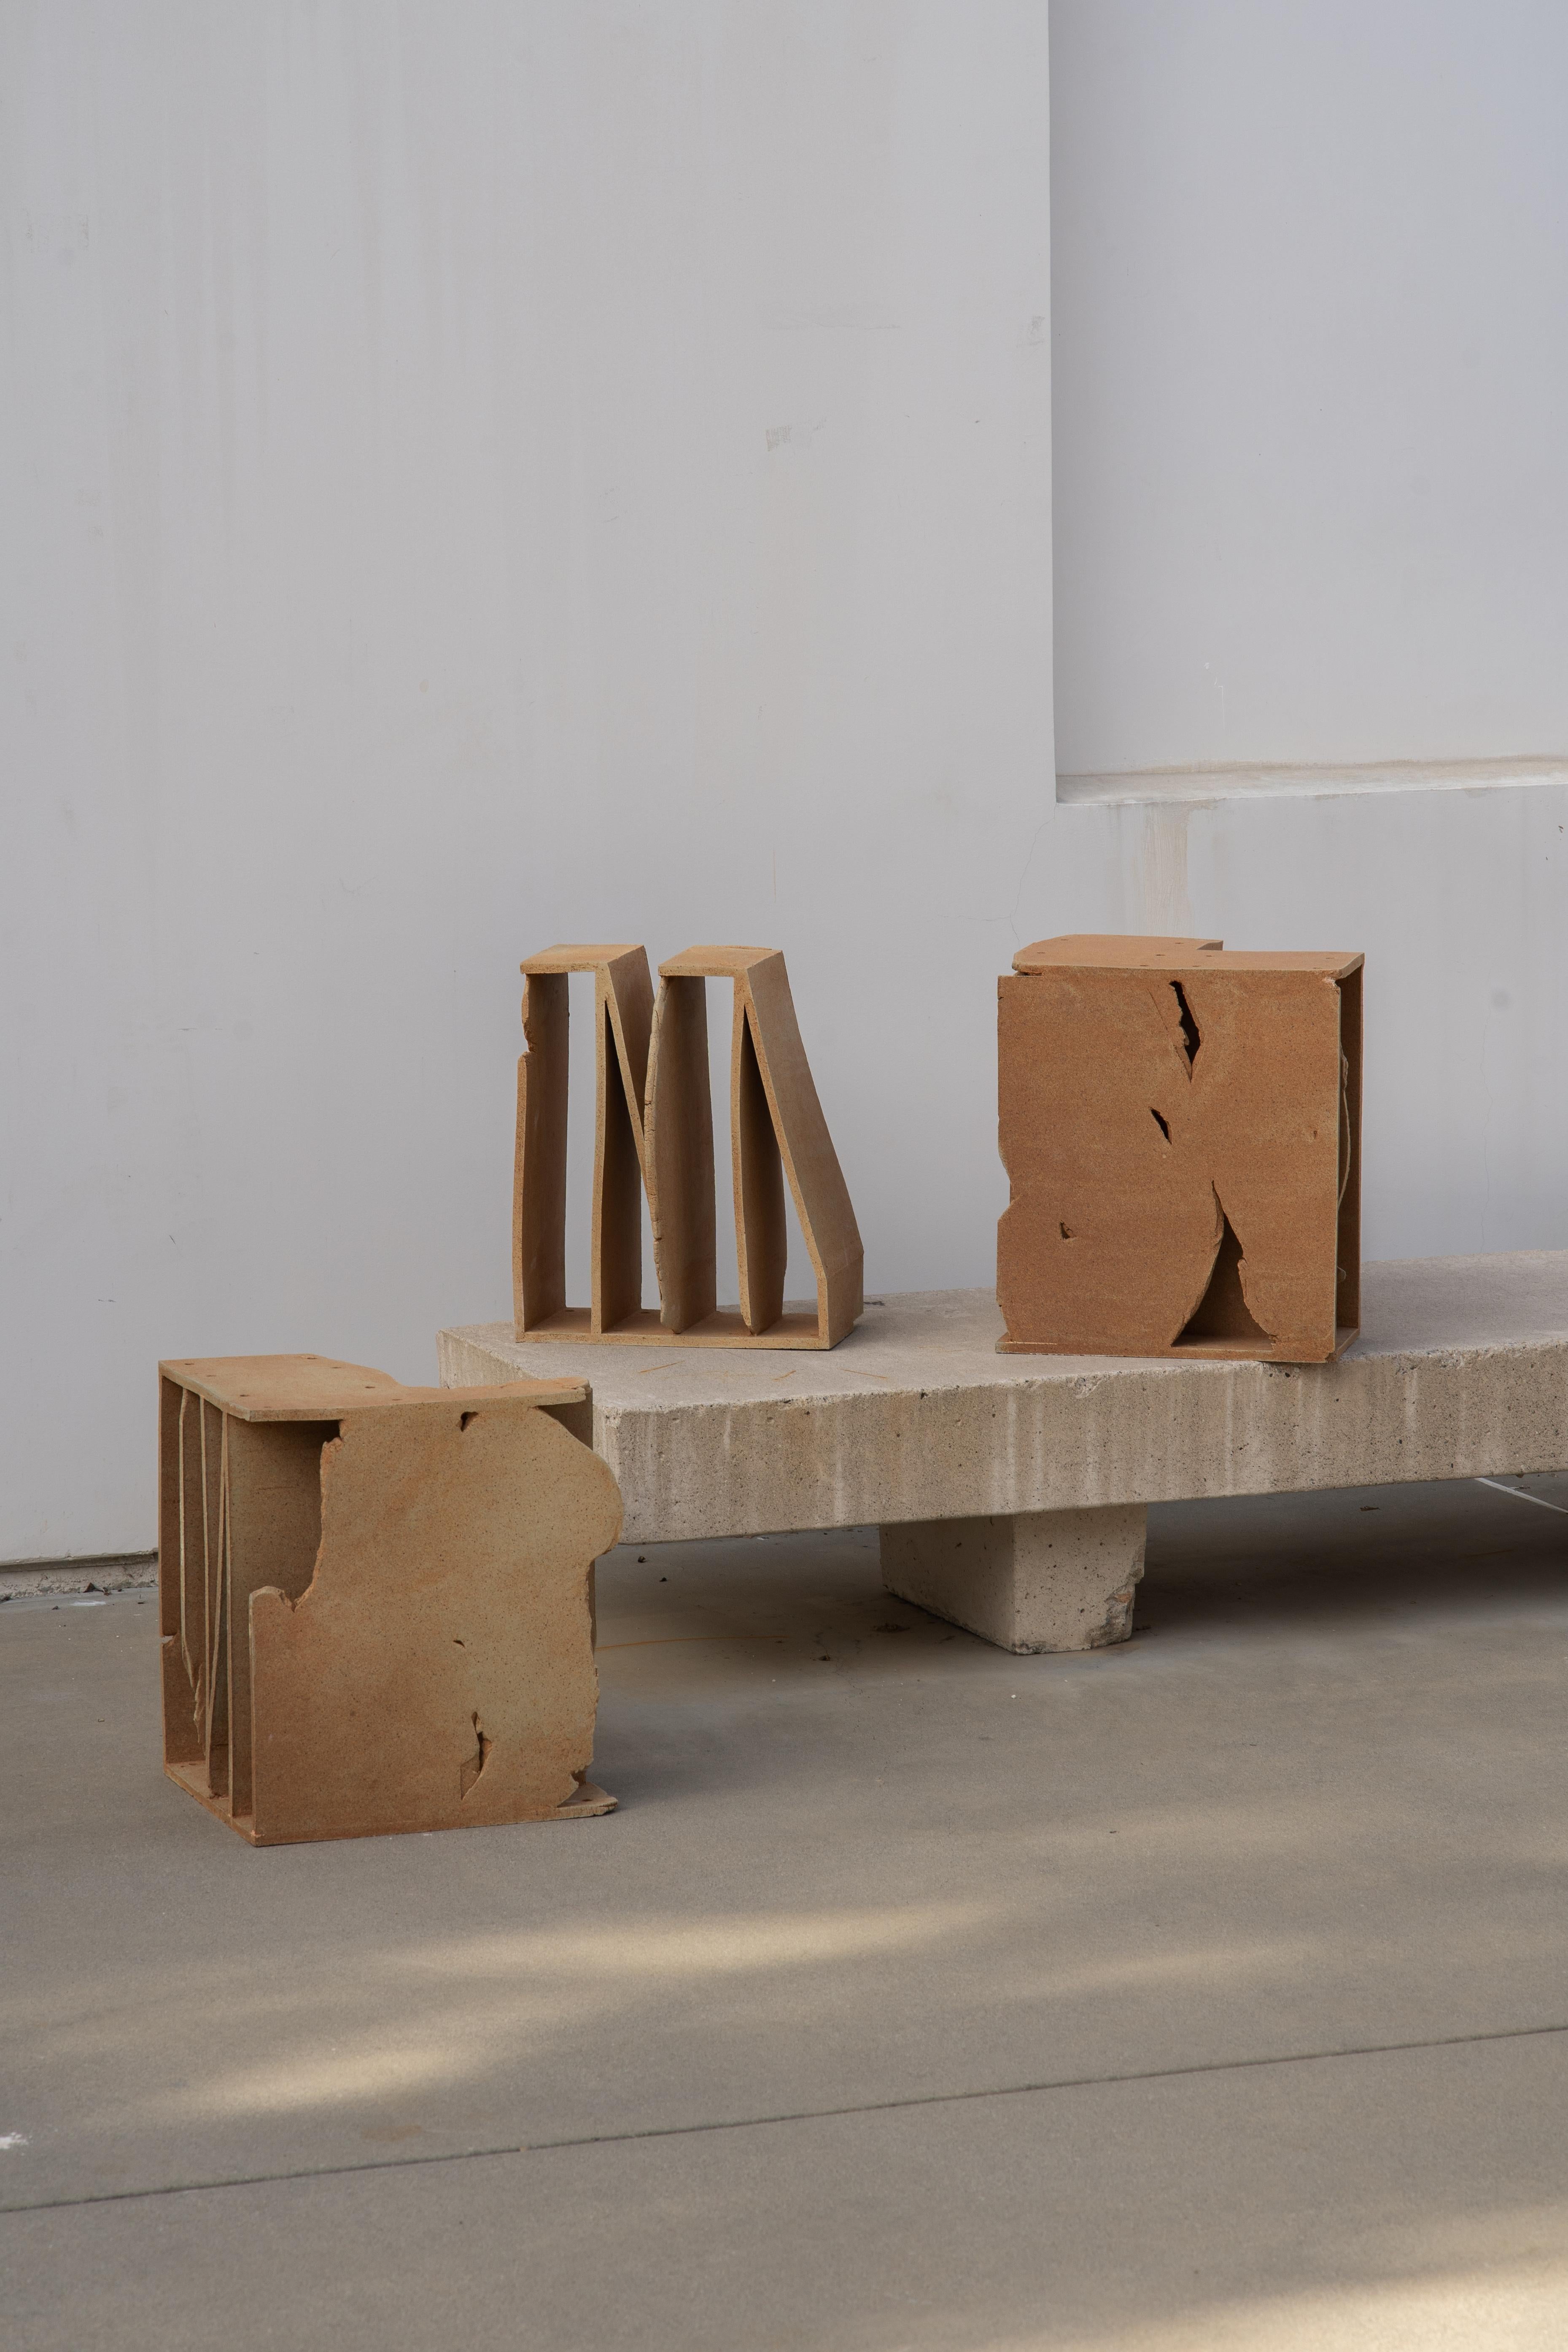 405 A1 Shelve by Turbina
Dimensions: W 40 x D 35 x H 45 cm
Materials: Fired Clay

The 405 project refers to the flow of movement, the path, the road. It is through the journey along the road that the human being (re)constructs the territory,